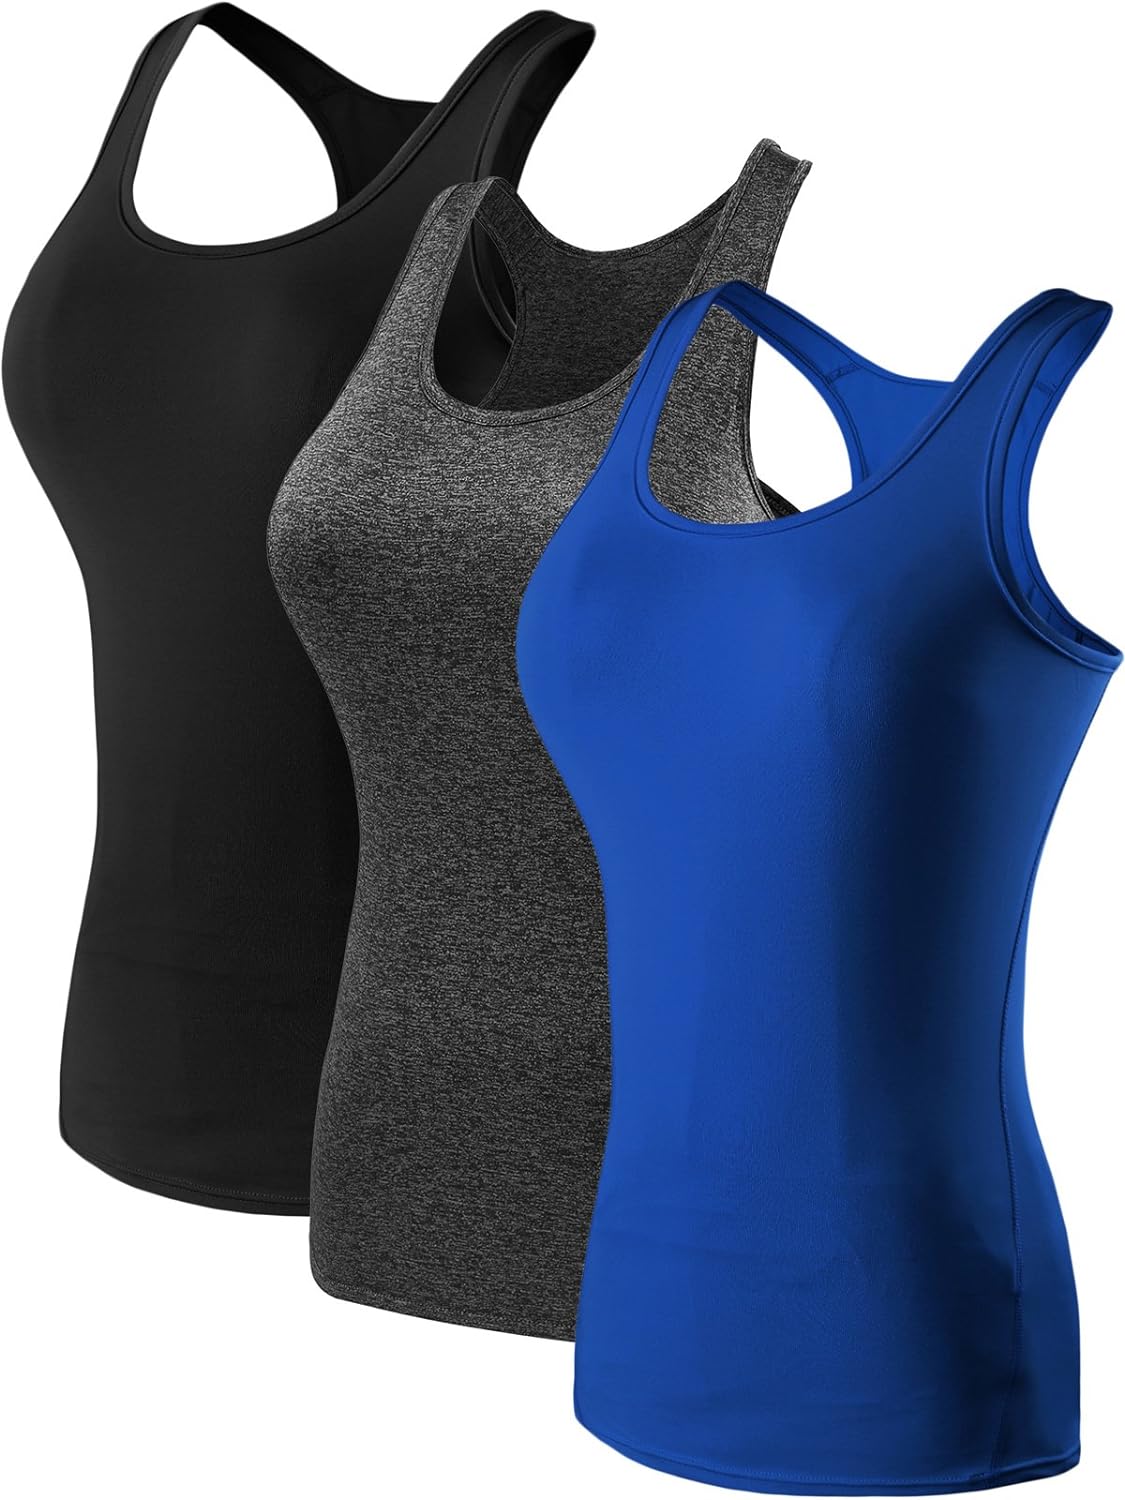 NELEUS Women’s 3 Pack Compression Base Layer Dry Fit Tank Top